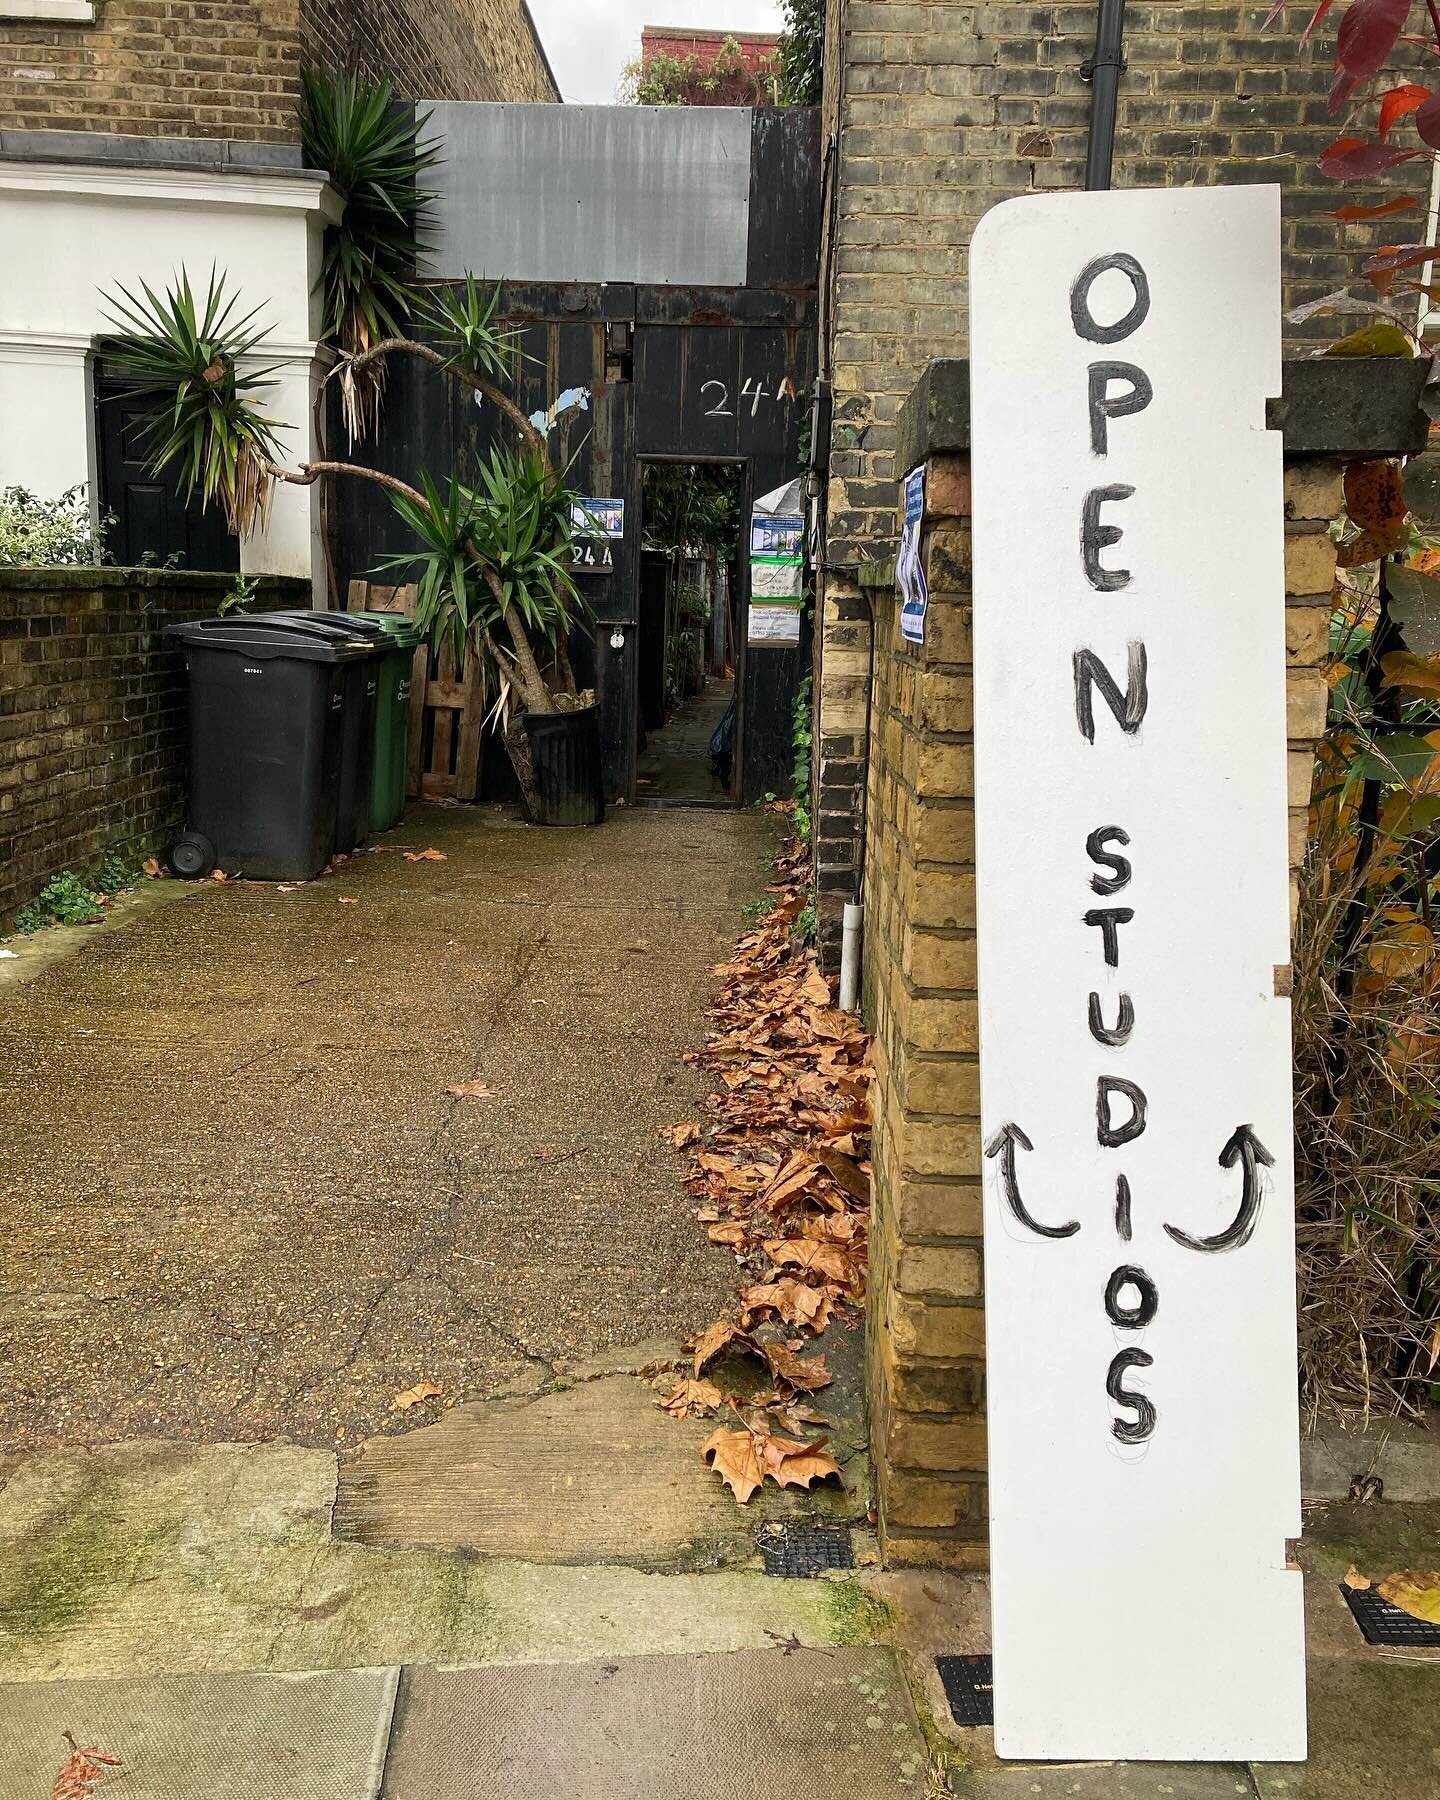 The studios are open!  24a Bartholomew Villas
Kentish Town
NW5 2LL

Open till 5pm

Textiles, ceramics and more
 @mimijoung_studio  #openstudio #northlondon #kentishtown #handembroidery #contemporaryembroidery #textileart #nw5